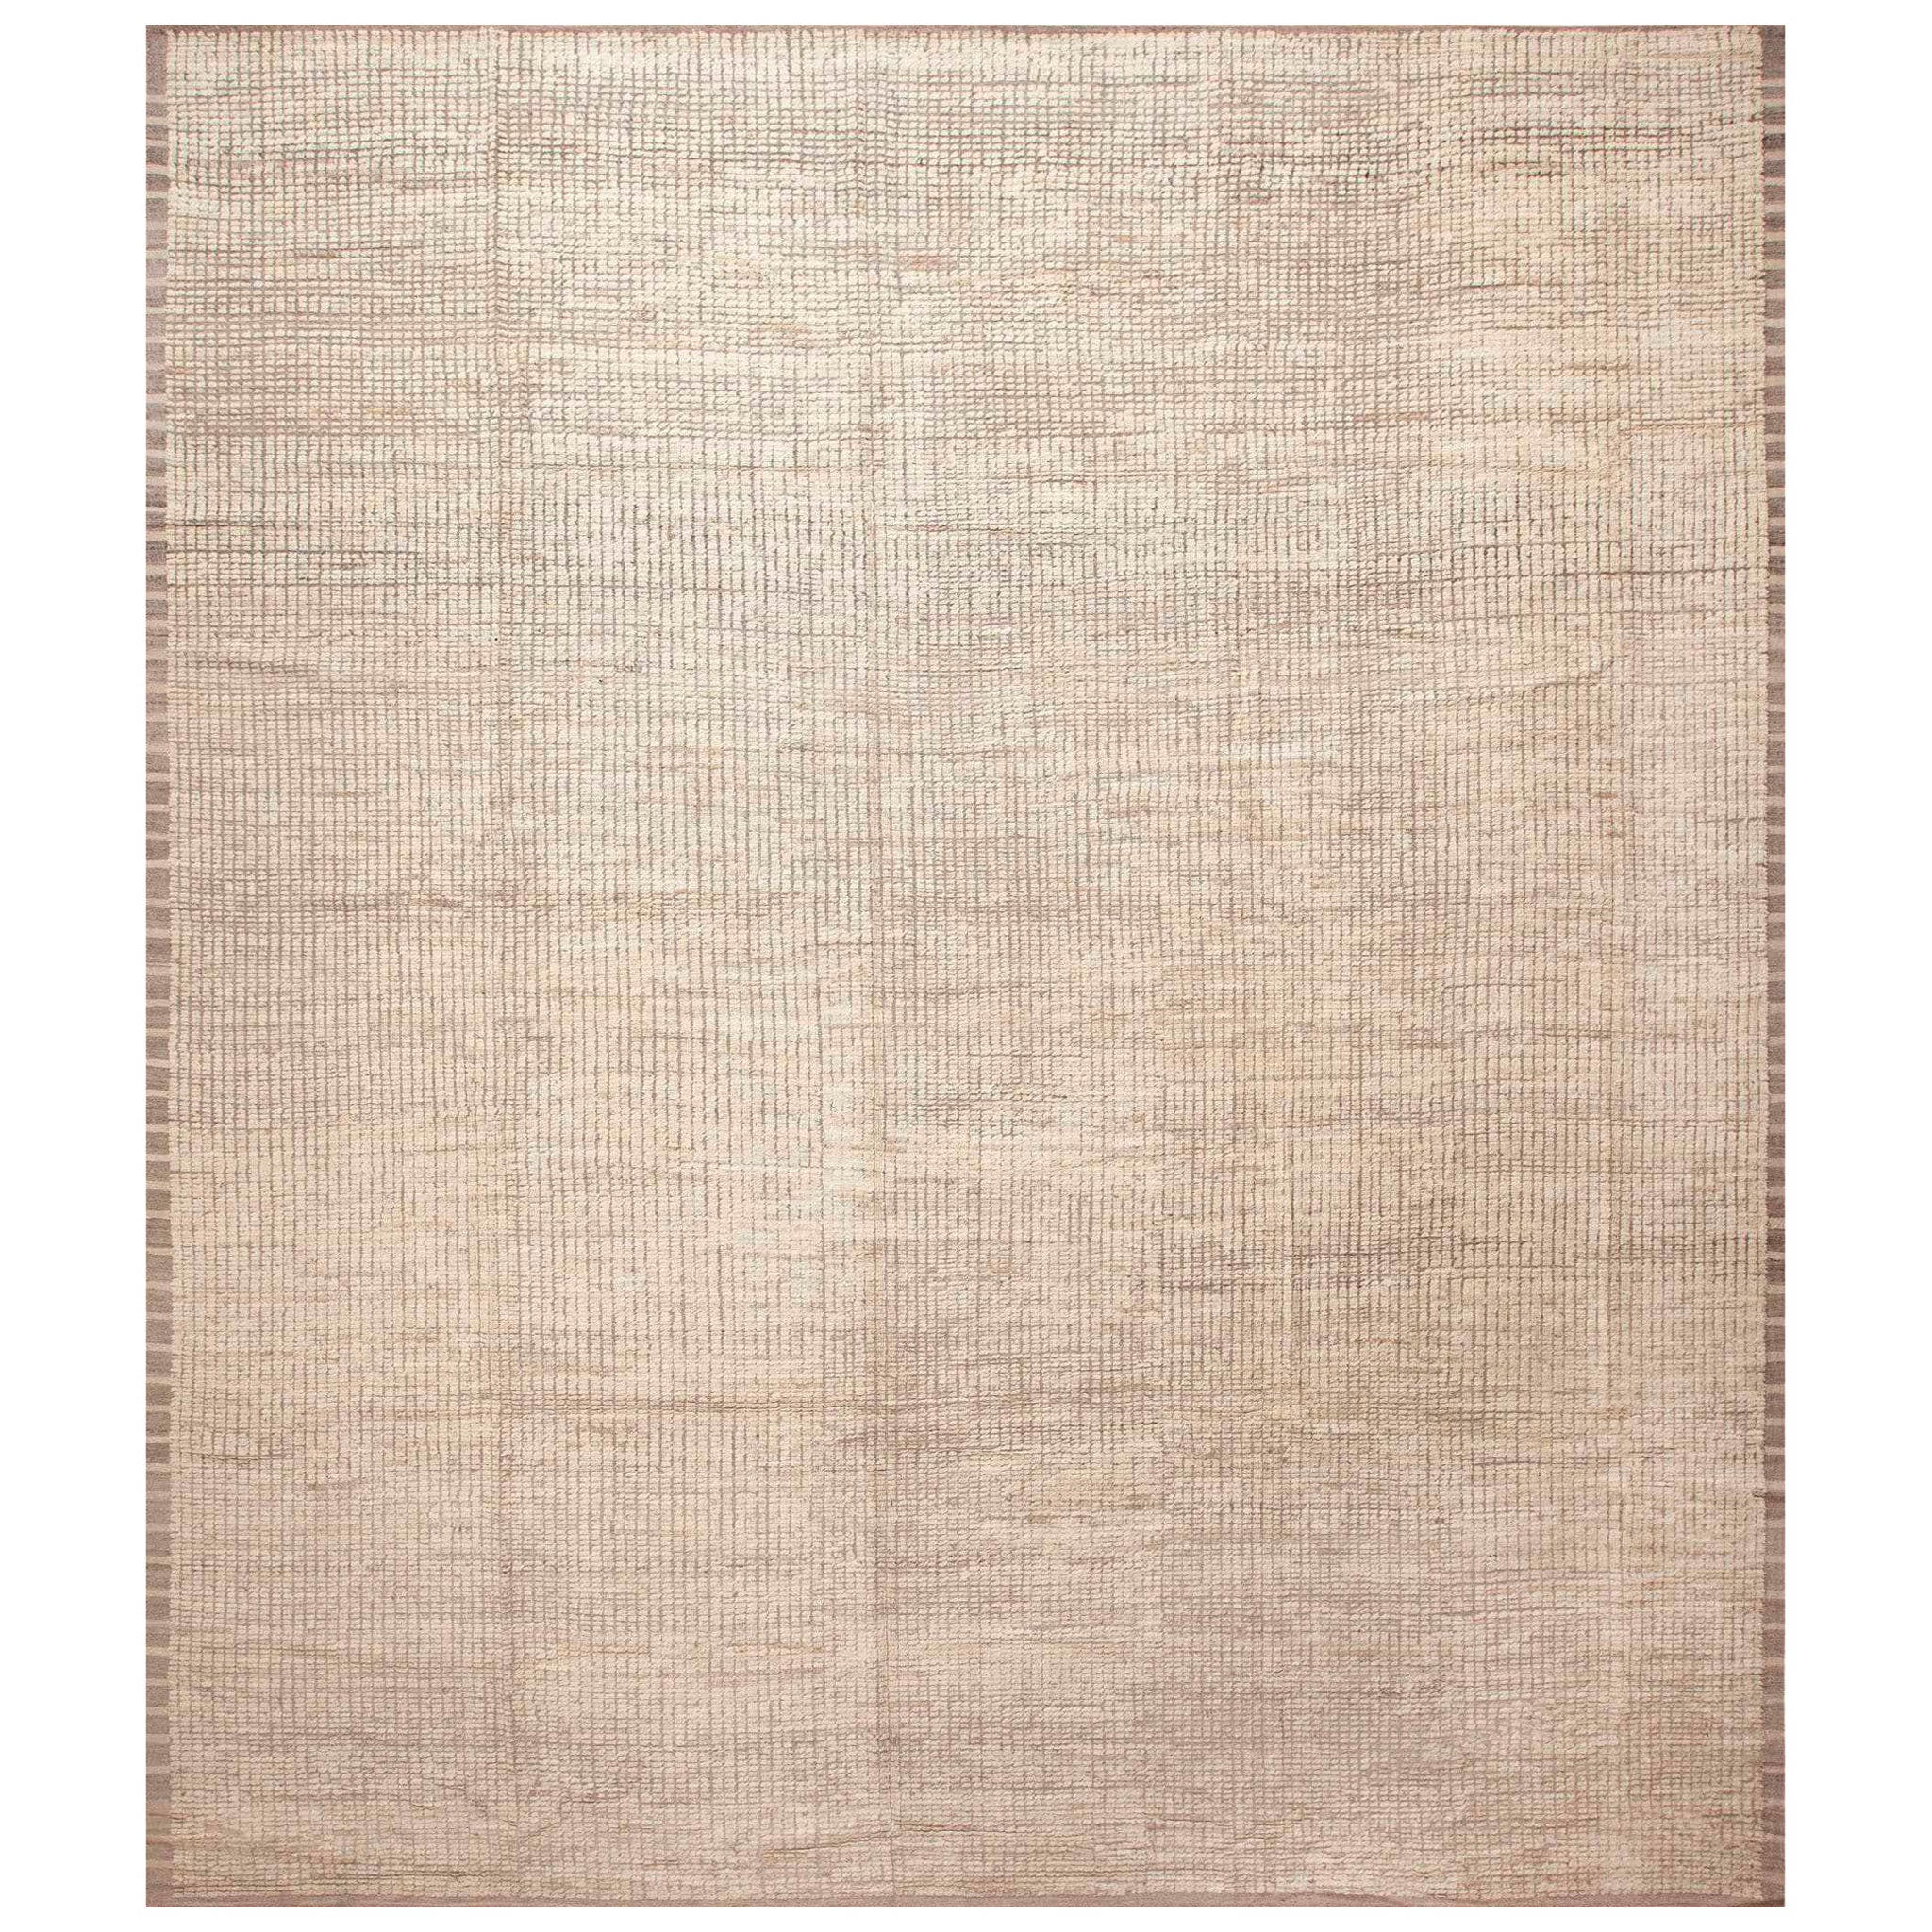  Nazmiyal Collection Neutral Minimalist Cream Color Modern Rug 13'10" x 16'1" For Sale